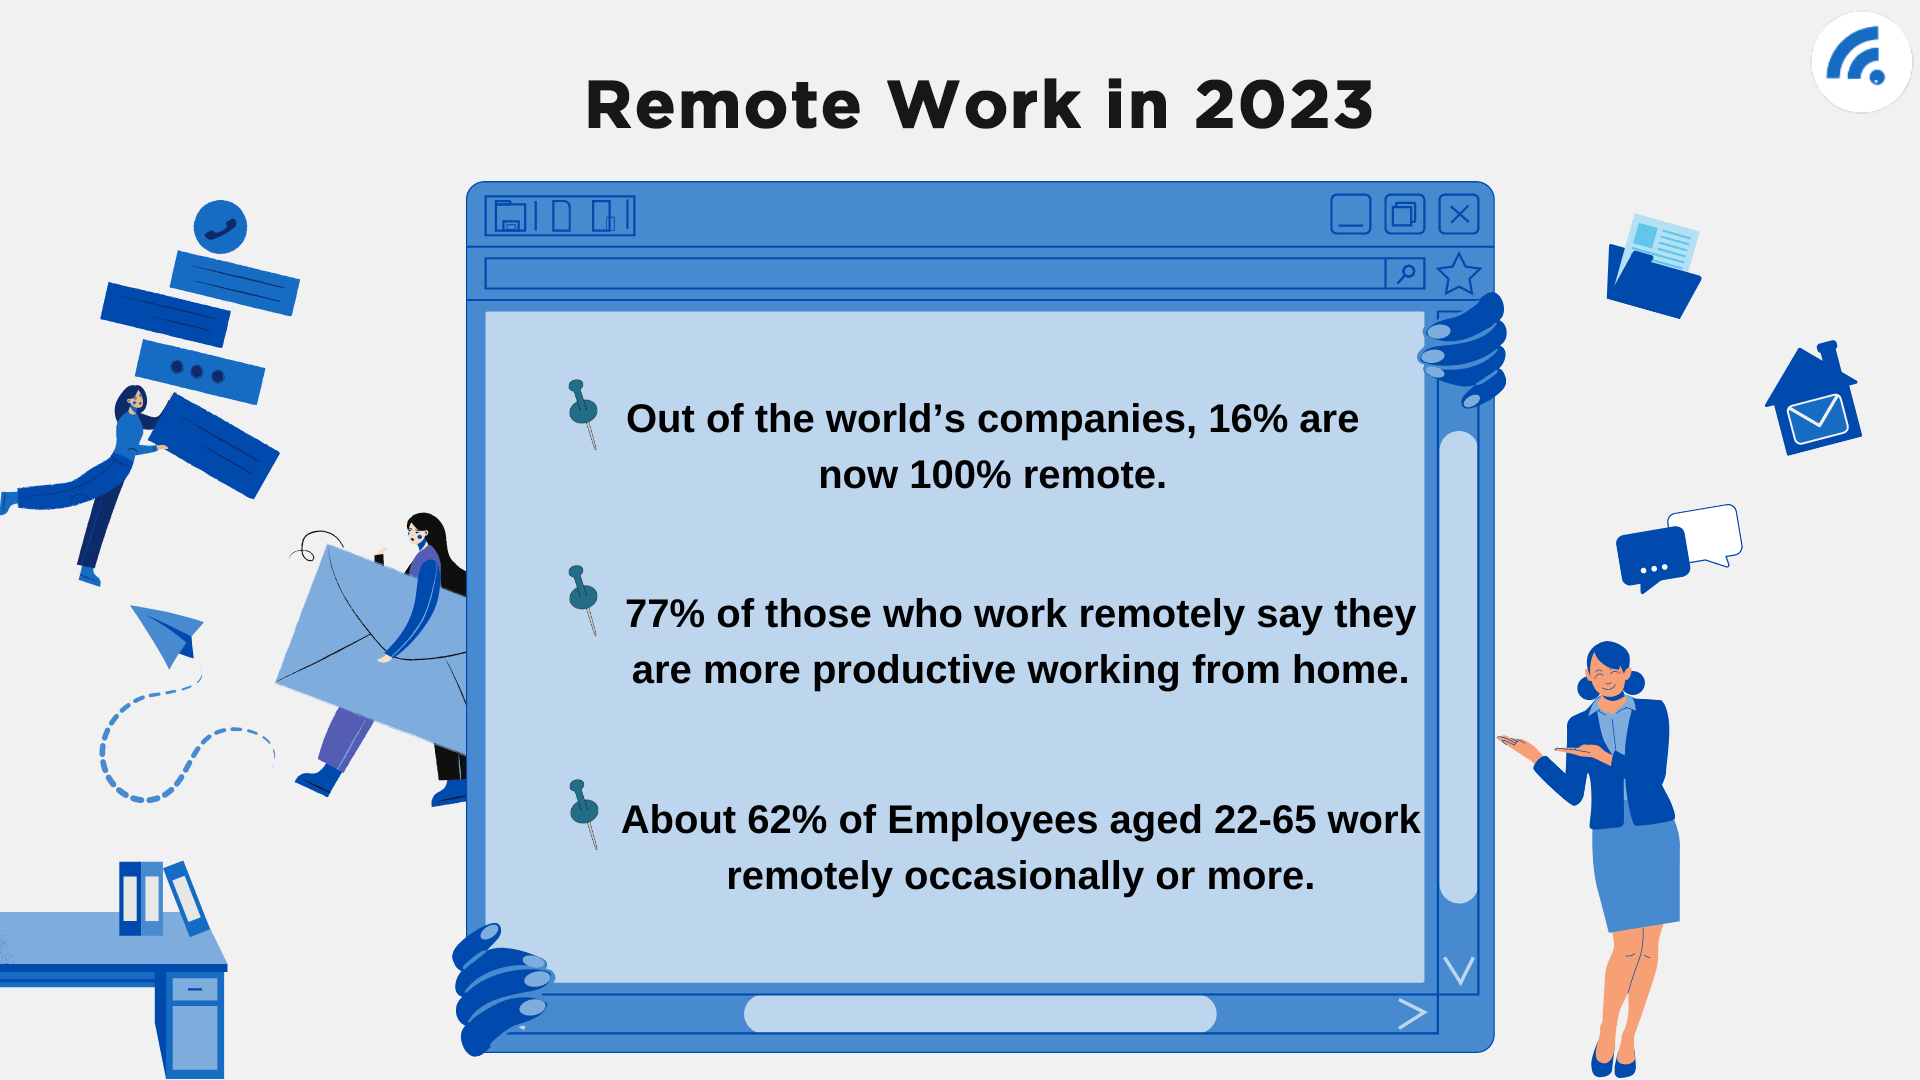 Remote Work in 2023